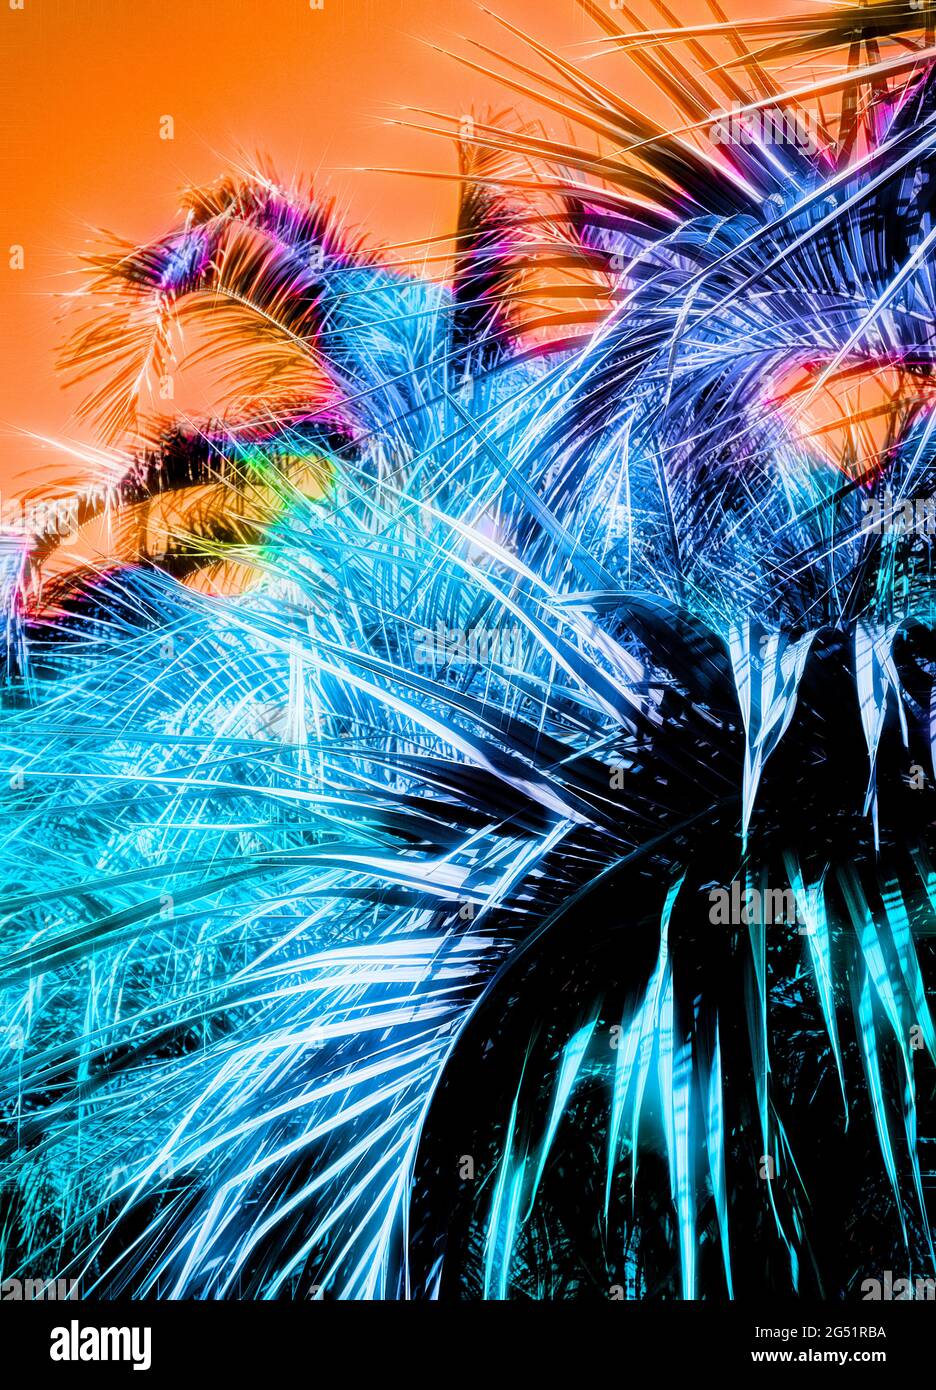 Photograph of palm trees with color manipulation Stock Photo